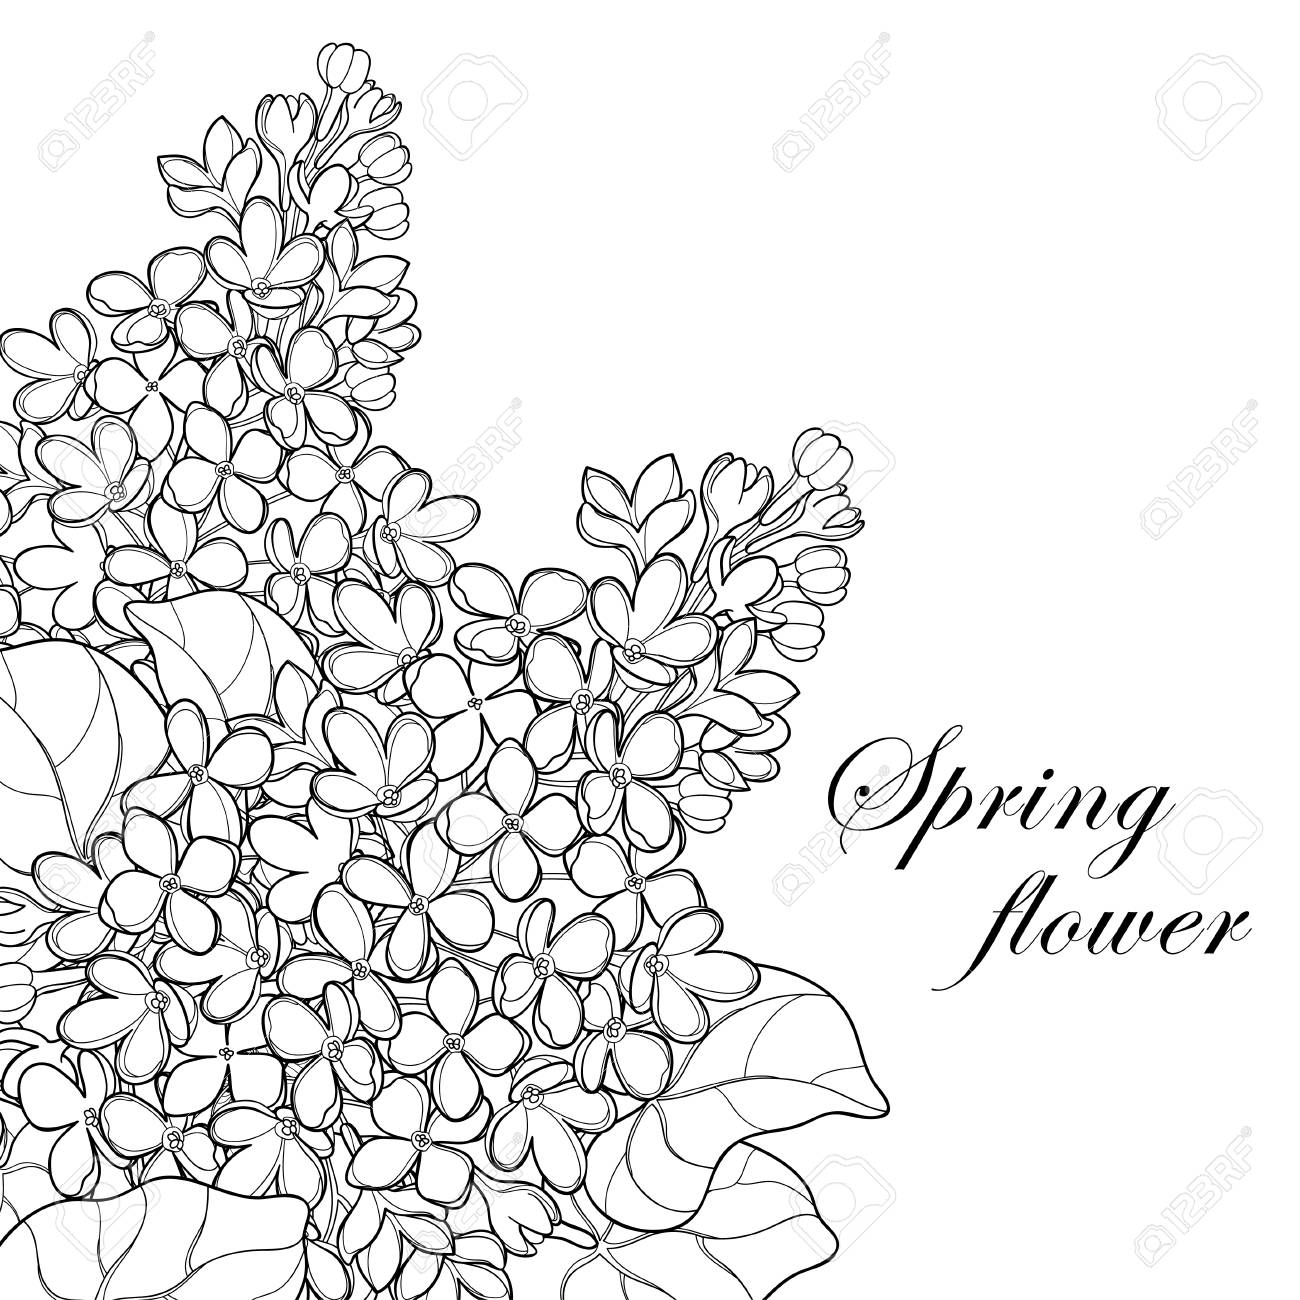 Bouquet with outline lilac or syringa flower bud and ornate leaf in black isolated on white background corner position of lilac bunch in contour style for spring design and coloring book royalty